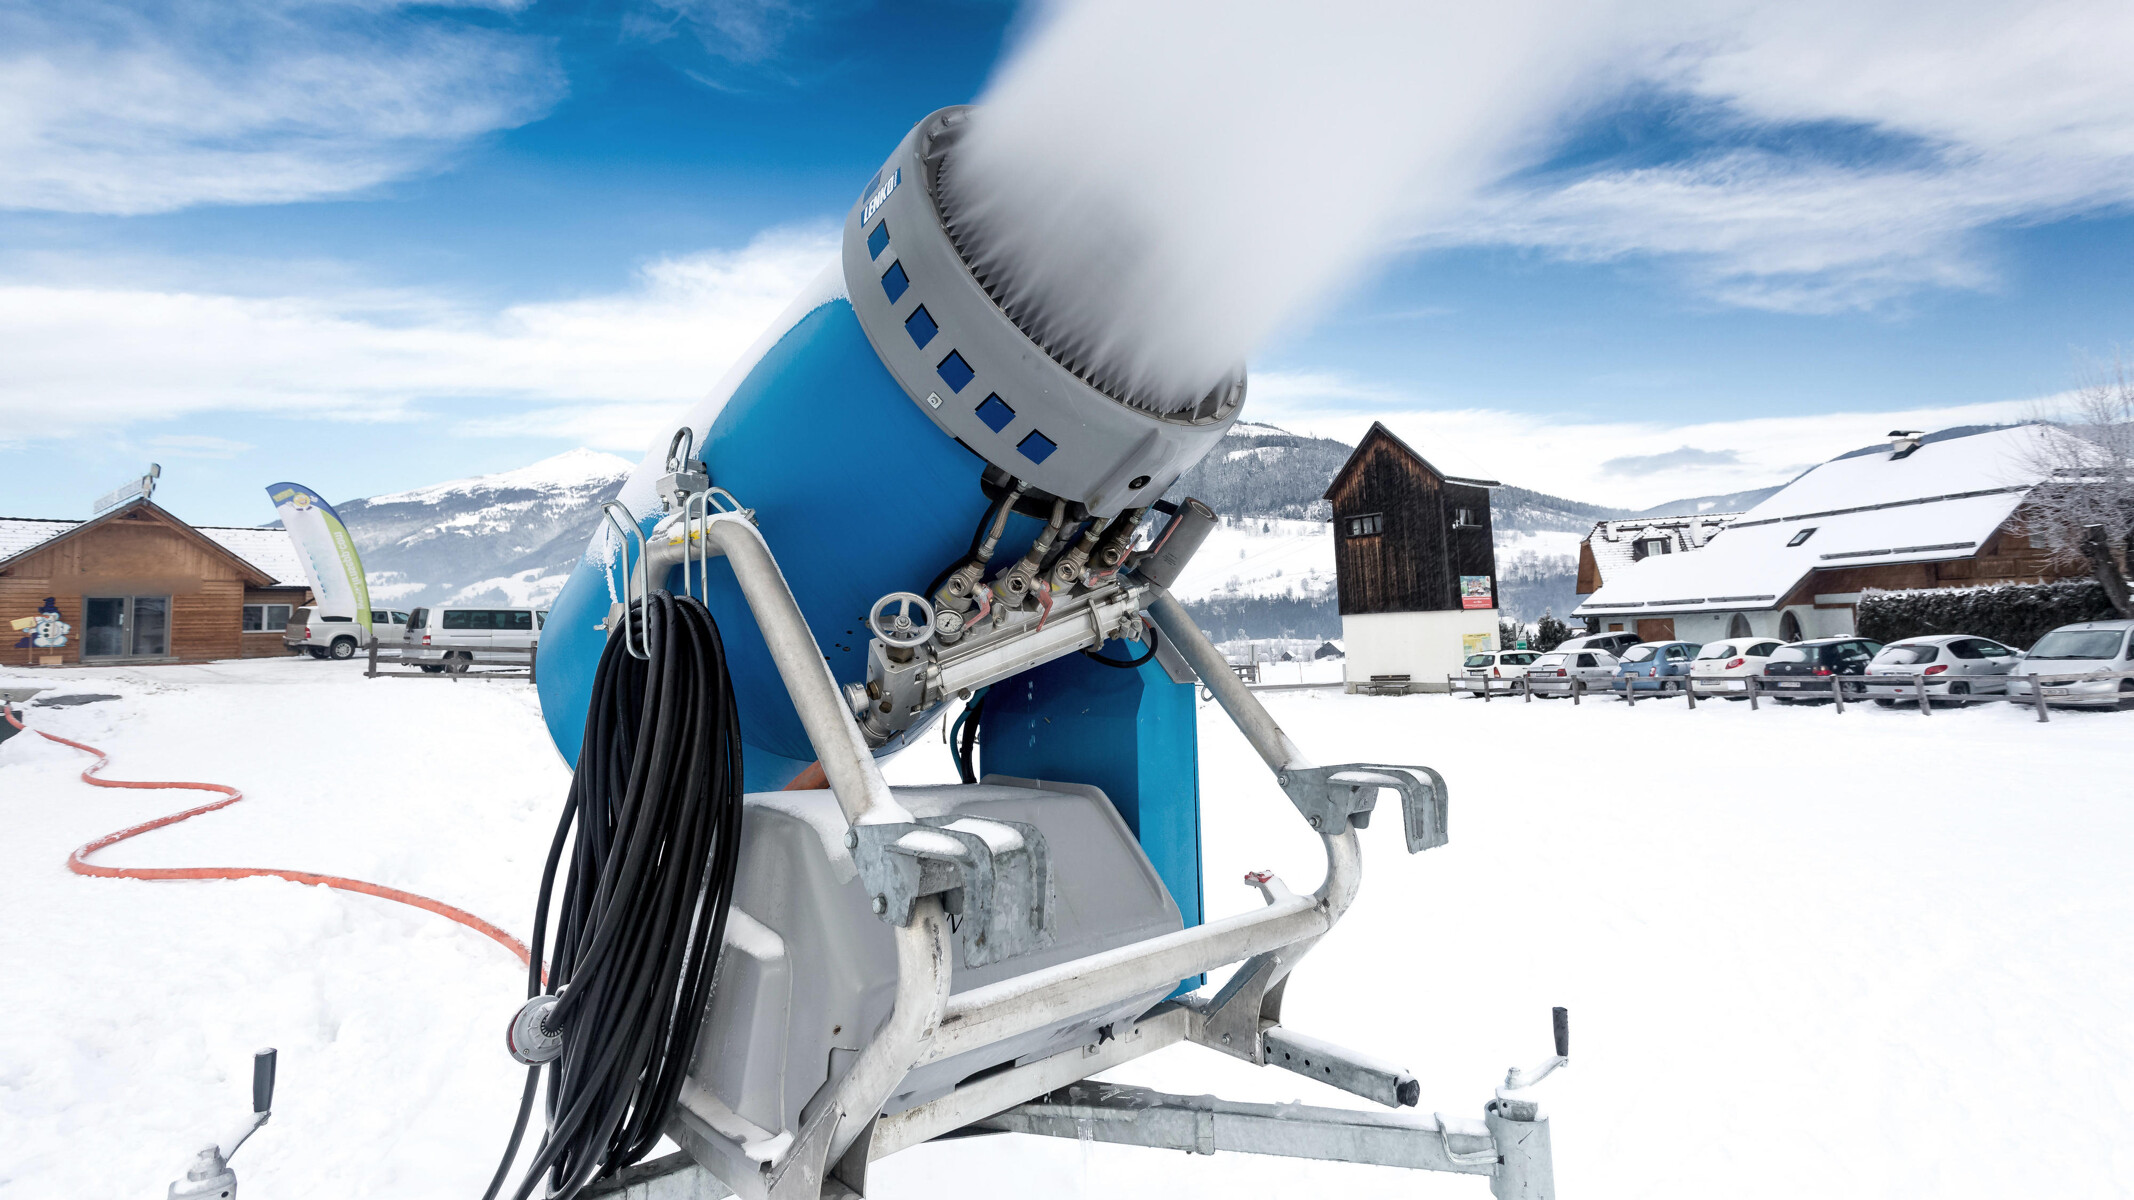 Snow-making equipment with KSB pumps